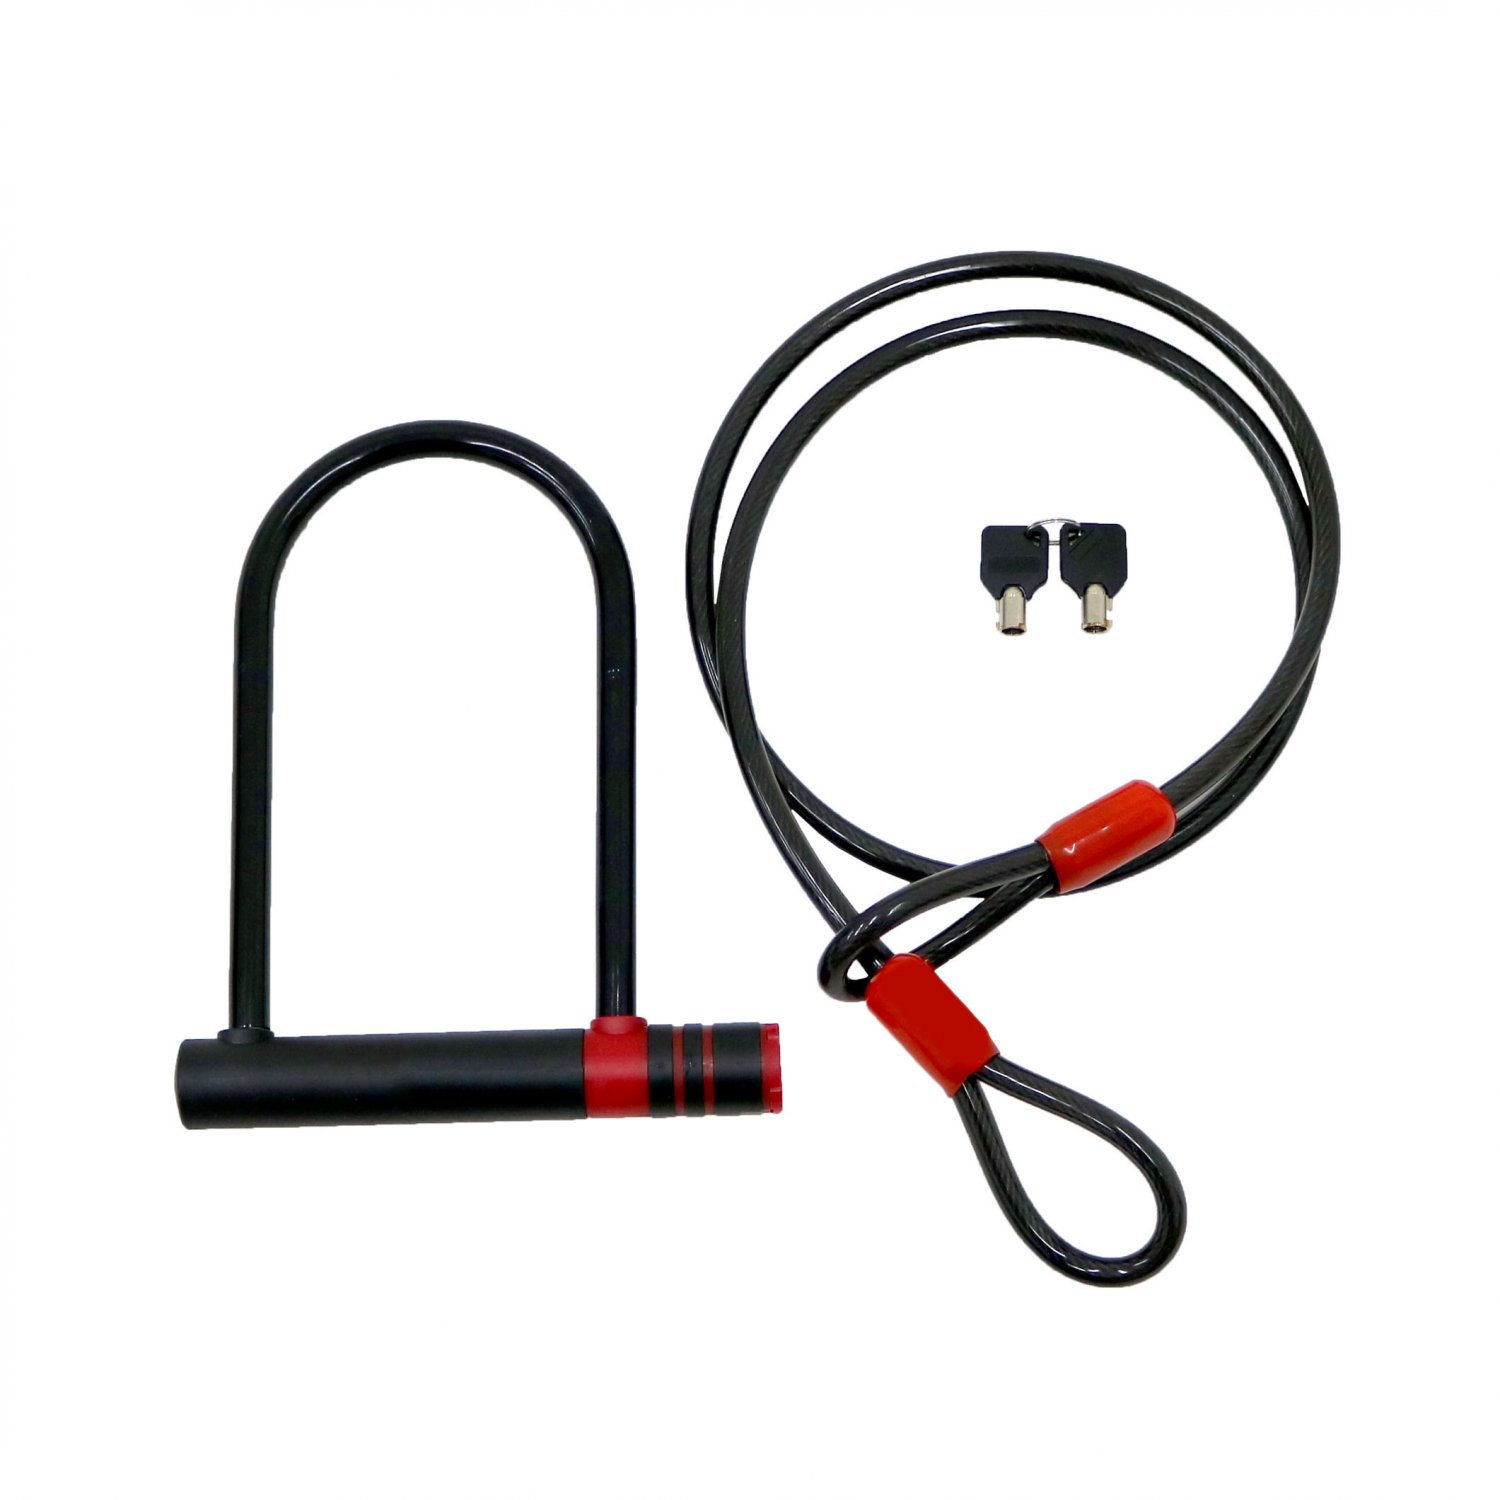 Anti-Theft U D Shape Bike Bicycle Secure Lock with 4ft Cable